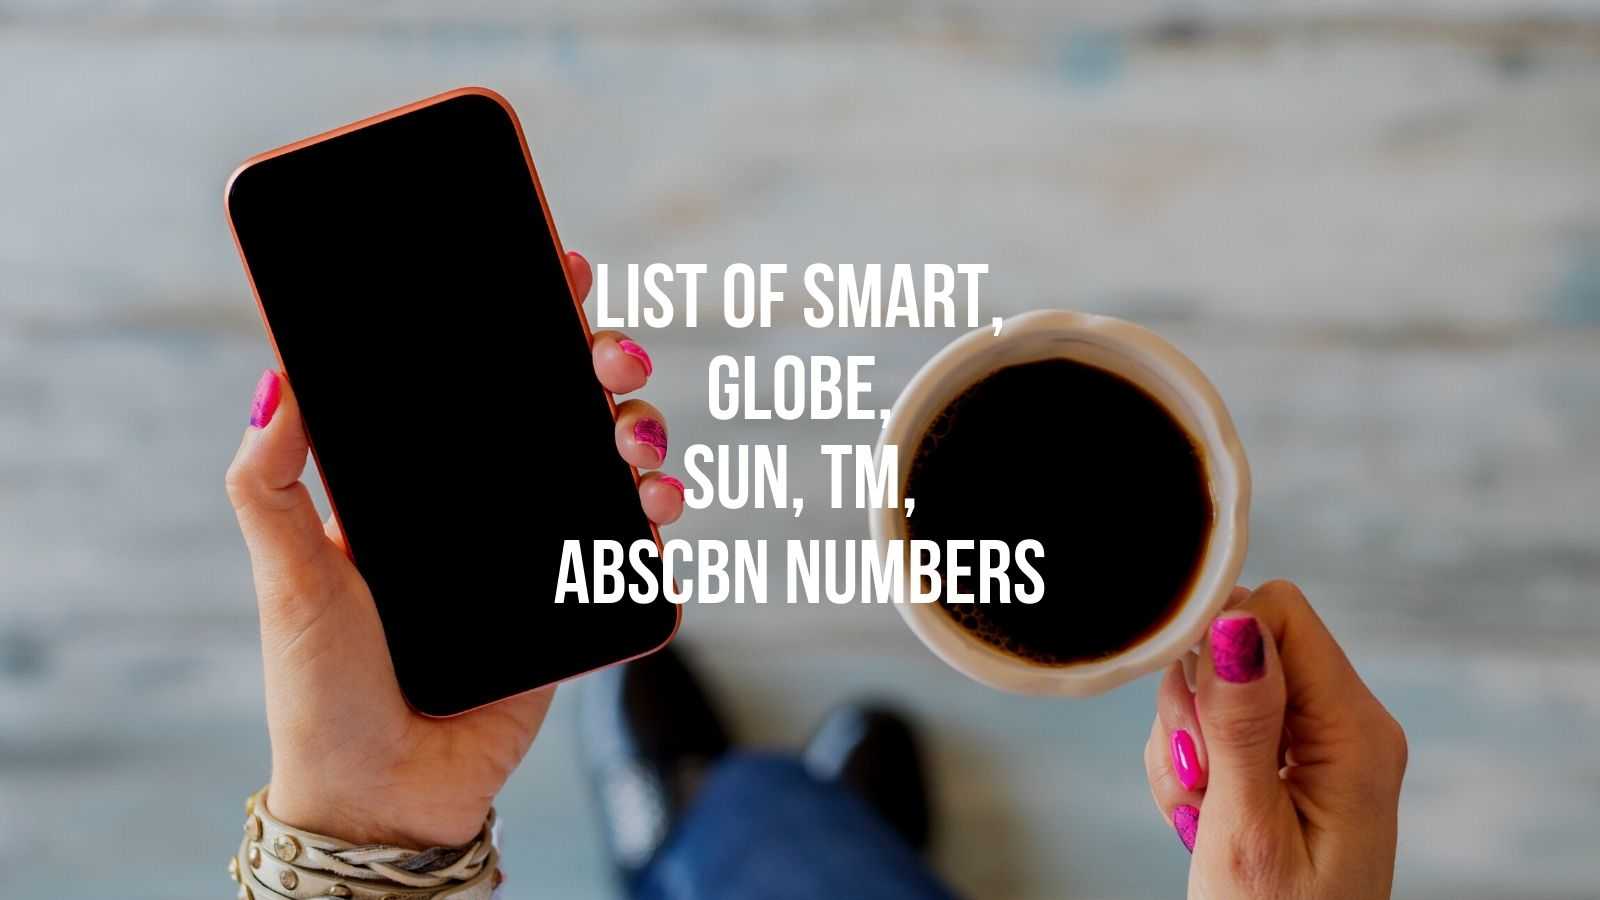 list of smart globe sun tm abscbn mobile numbers